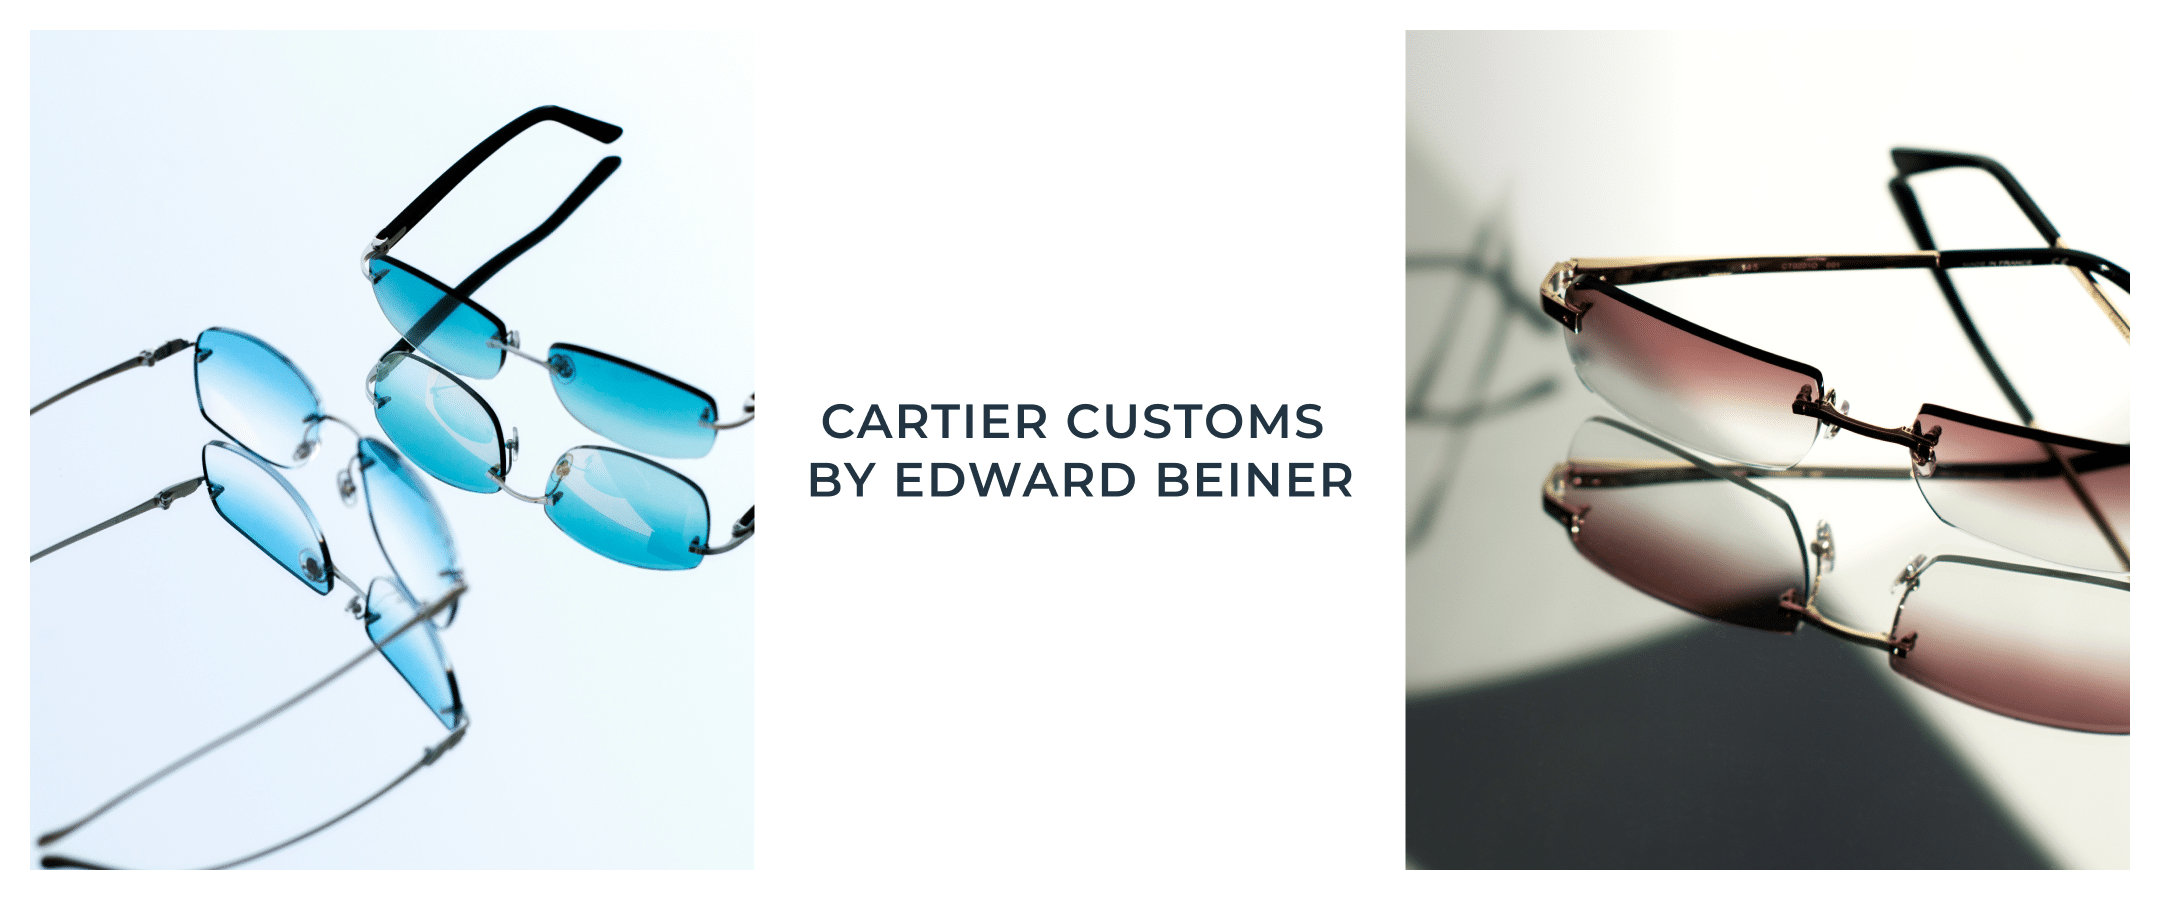 Cartier Customs By Edward Beiner 1 Collection Image